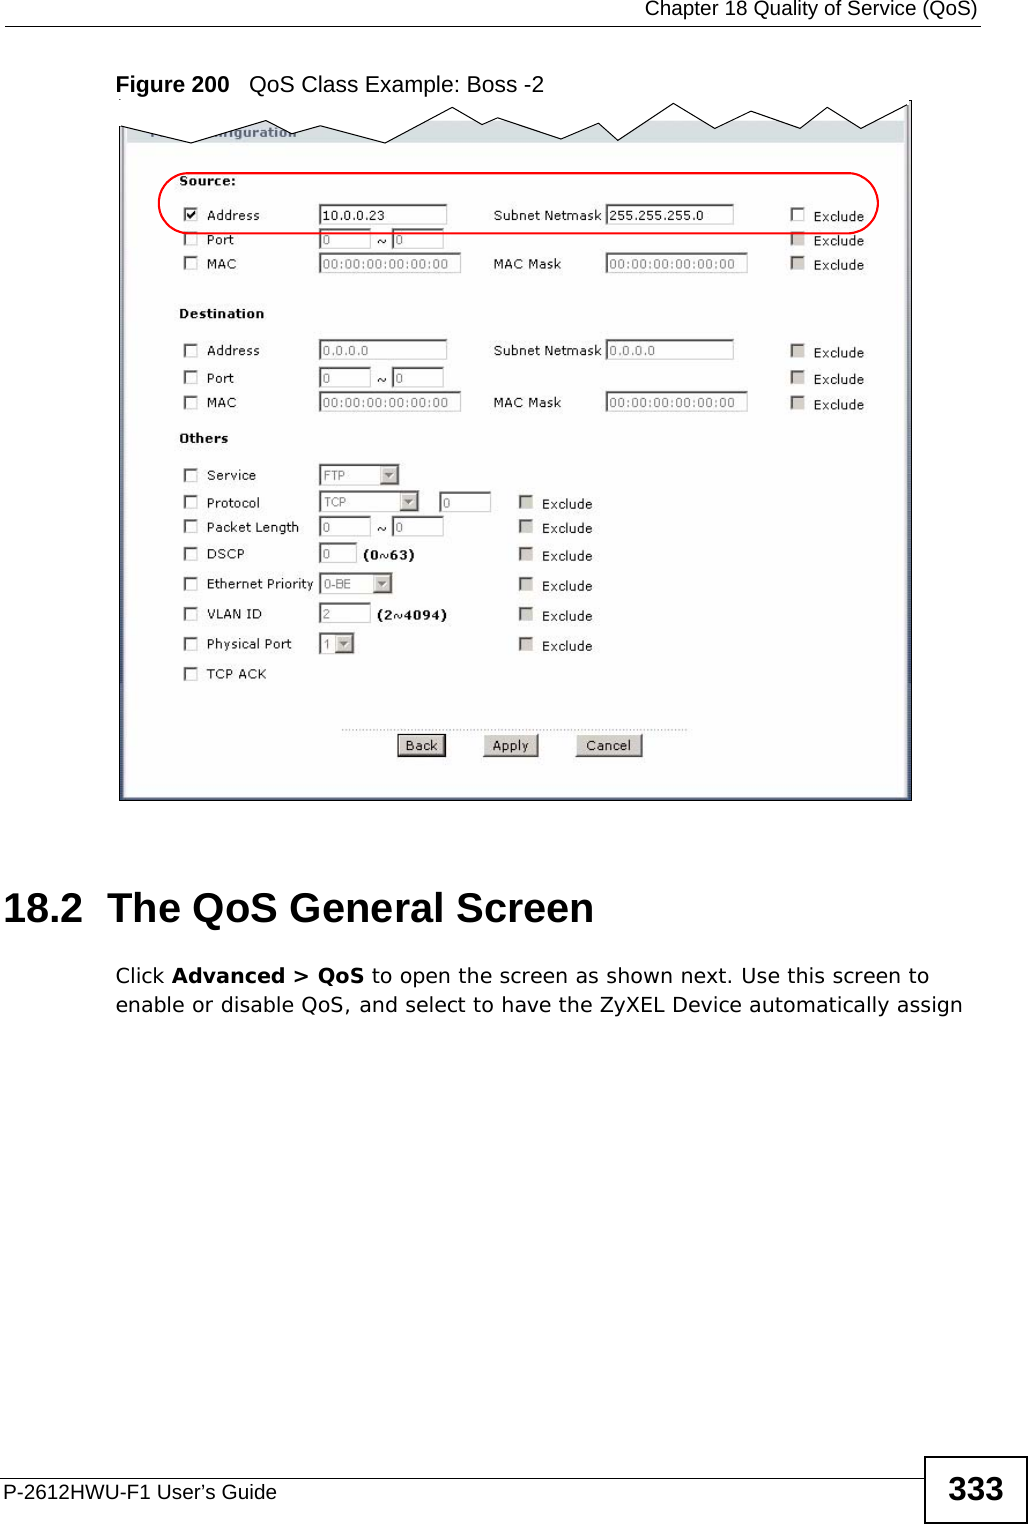  Chapter 18 Quality of Service (QoS)P-2612HWU-F1 User’s Guide 333Figure 200   QoS Class Example: Boss -218.2  The QoS General Screen Click Advanced &gt; QoS to open the screen as shown next. Use this screen to enable or disable QoS, and select to have the ZyXEL Device automatically assign 